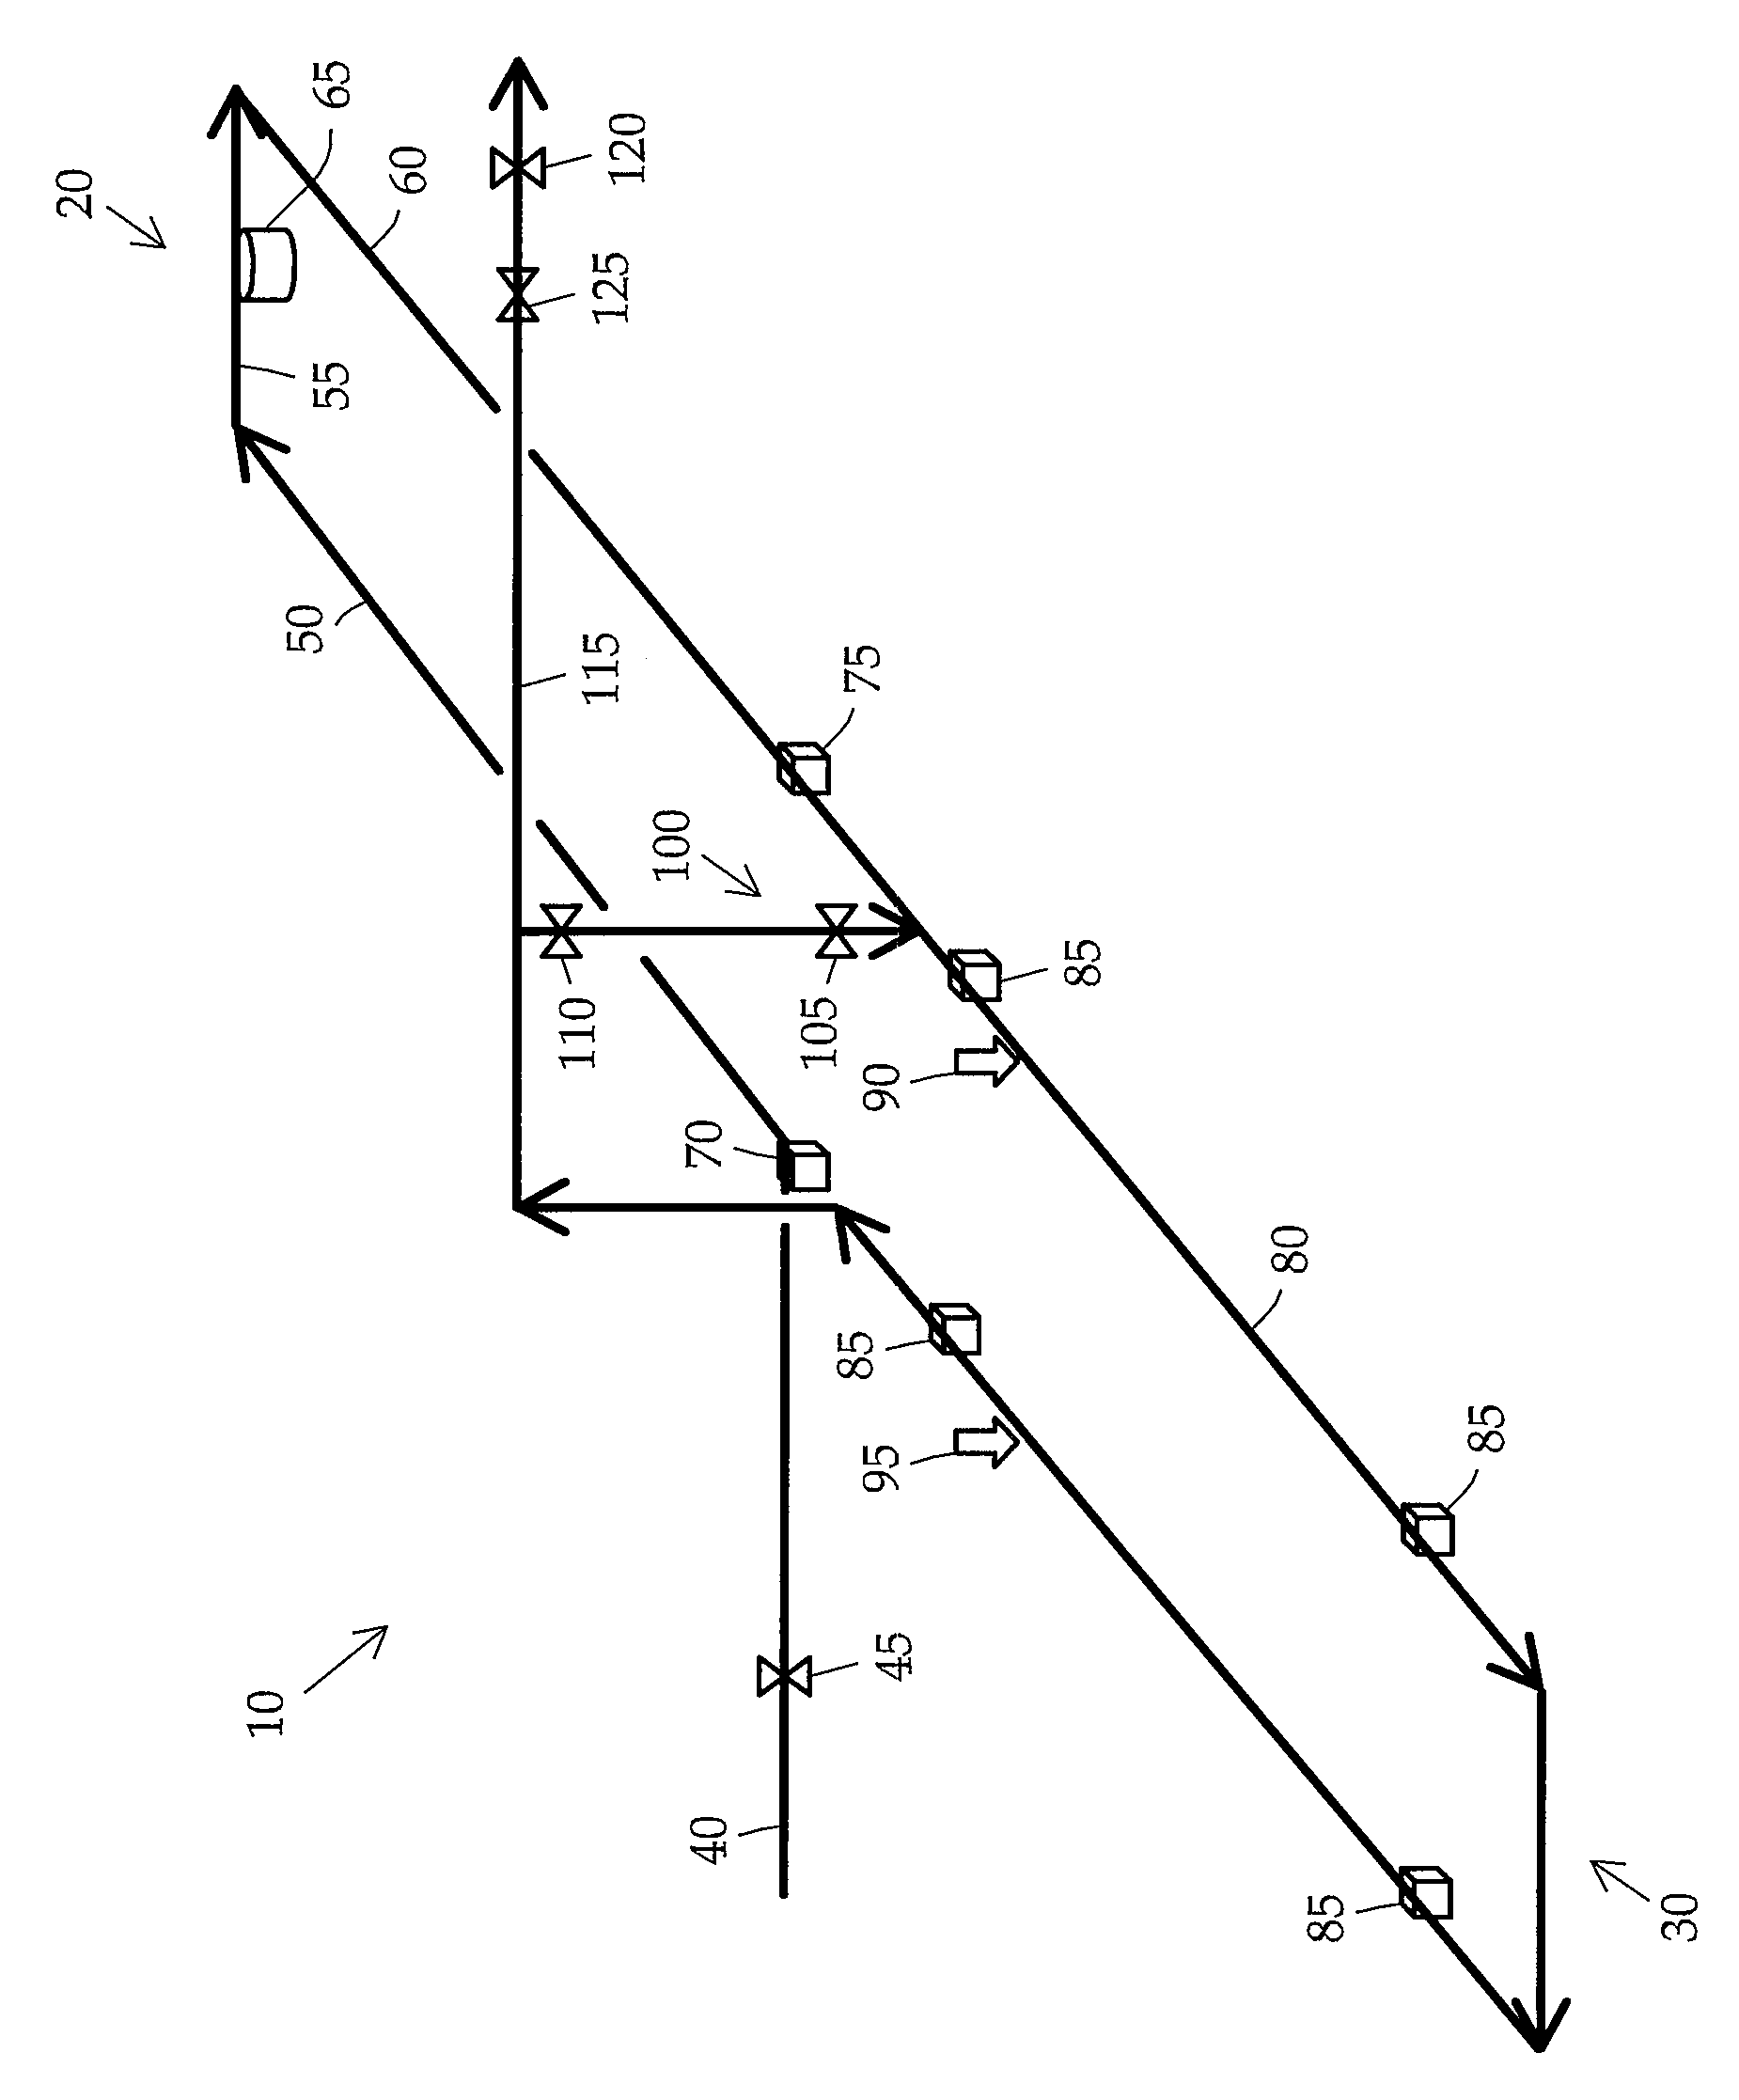 Multiphase mass flow metering system and method using density and volumetric flow rate determination